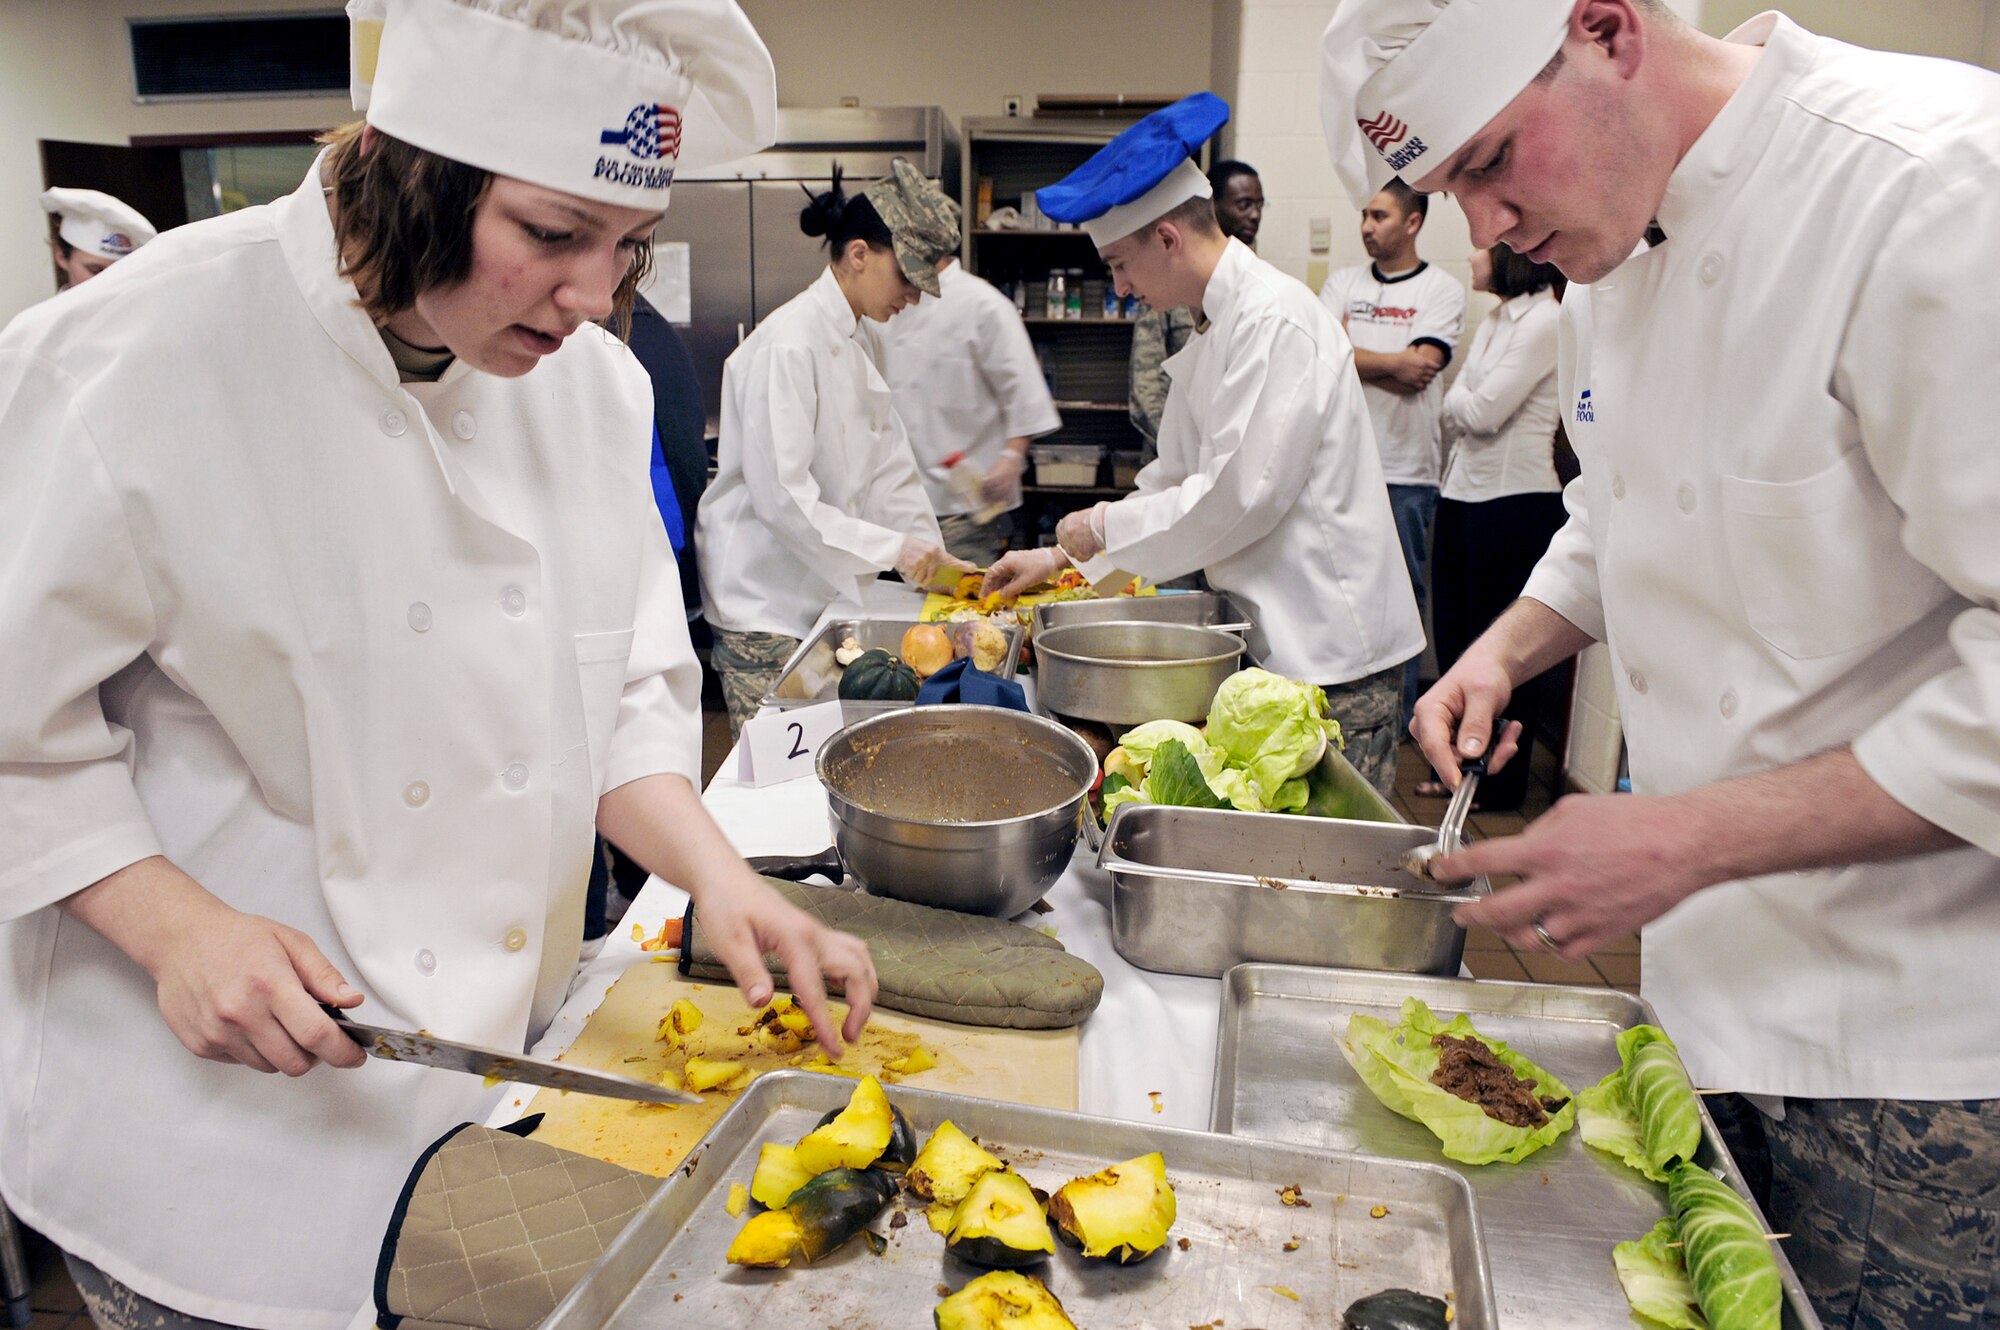 Airman 1st Class Tiffany Lamb and Airman Resse Audette prepare an entr?e and dessert for the second annual "Ellsworth Iron Chef" competition March 17, 2010, at Ellsworth Air Force Base, S.D. Airmen Lamb and Audette along with Airman 1st Class Brent Smith won the competition and were given professional knife sets as prizes. Airmen Lamb, Smith and Audette are 28th Force Support Squadron food services technicians. (U.S. Air Force photo/Senior Airman Marc I. Lane)
